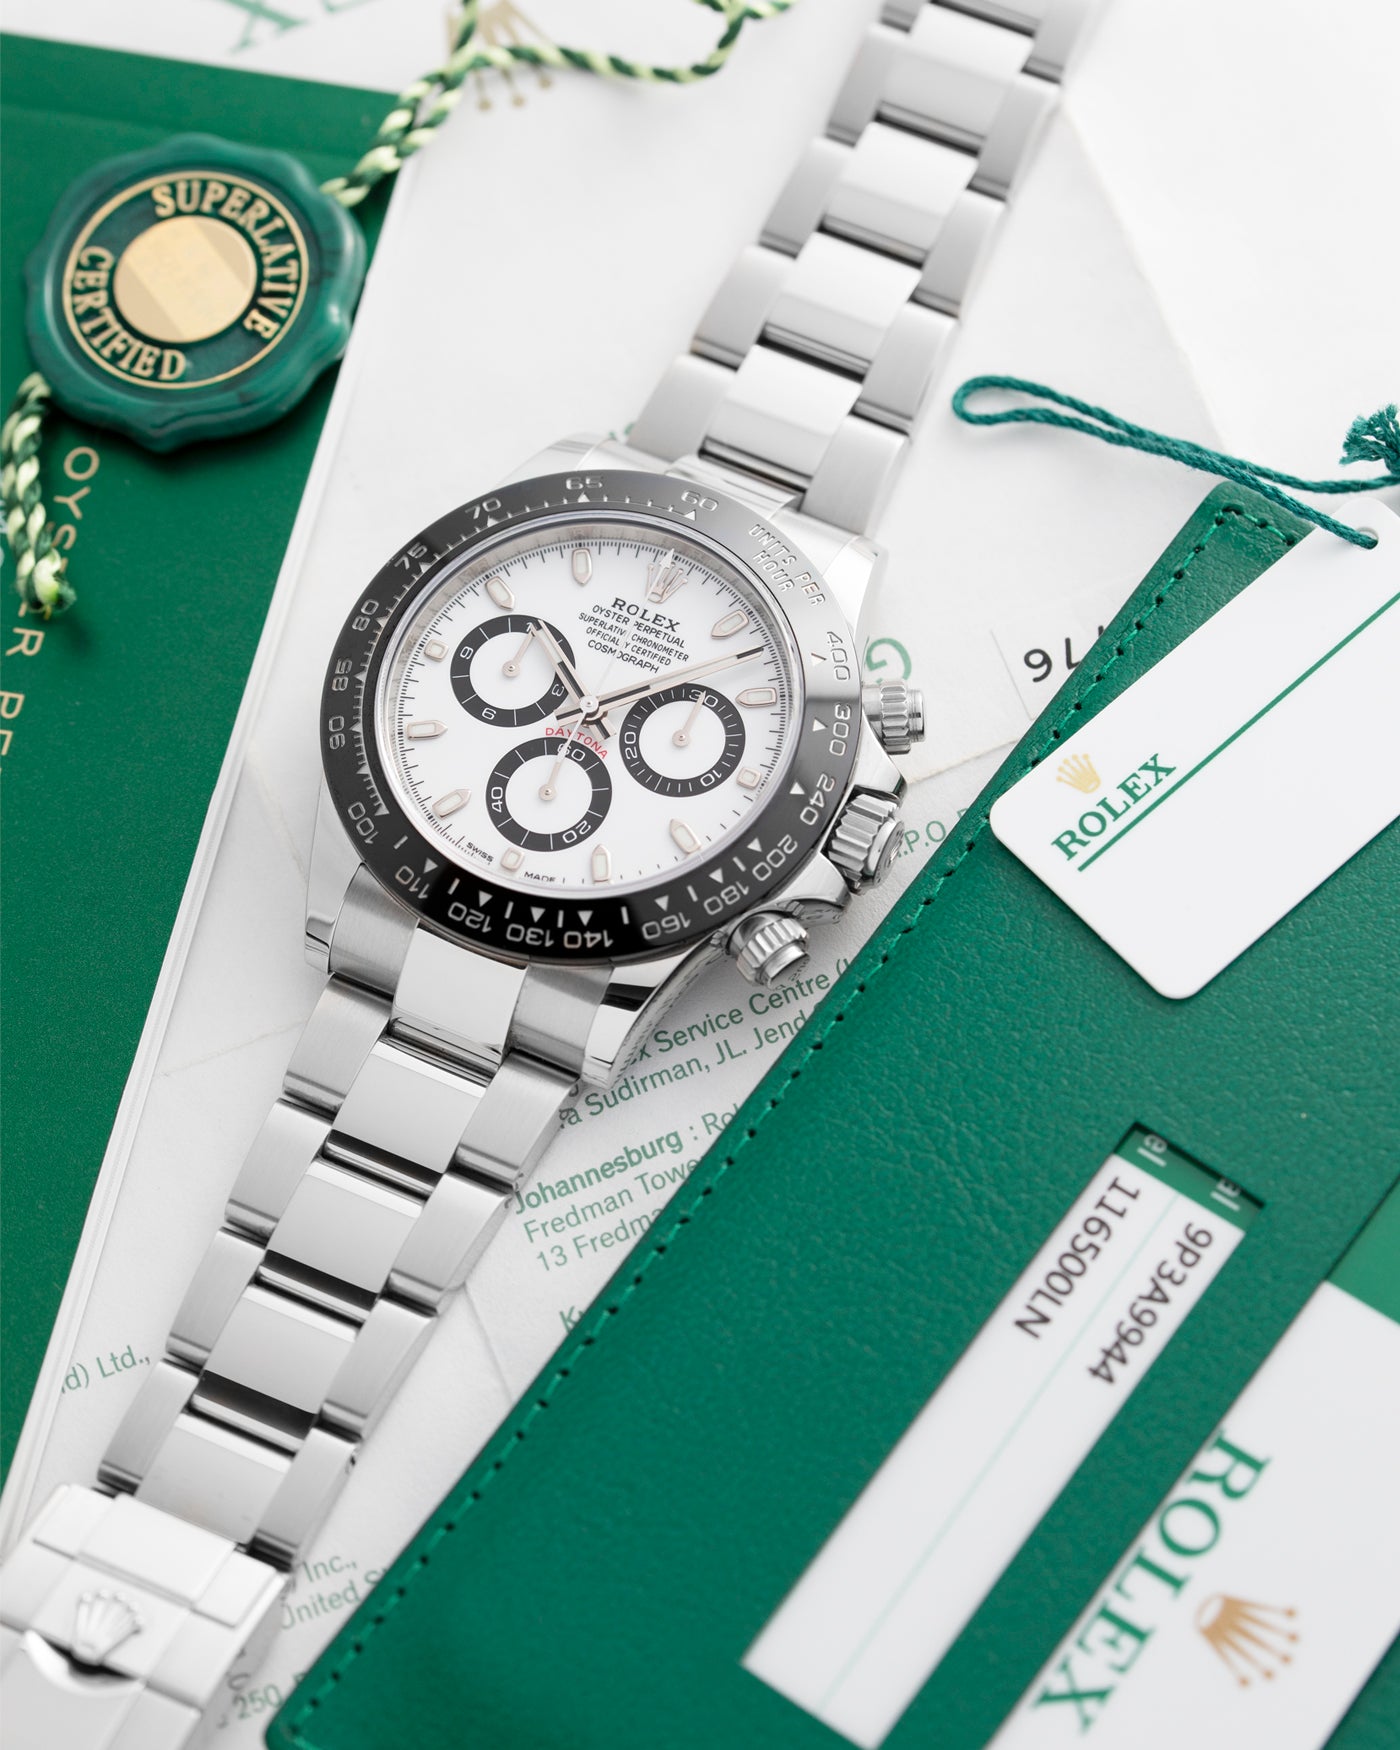 Rolex Cosmograph Daytona 116500 Panda Chronograph Watch | S.Song Timepieces – S.Song Watches